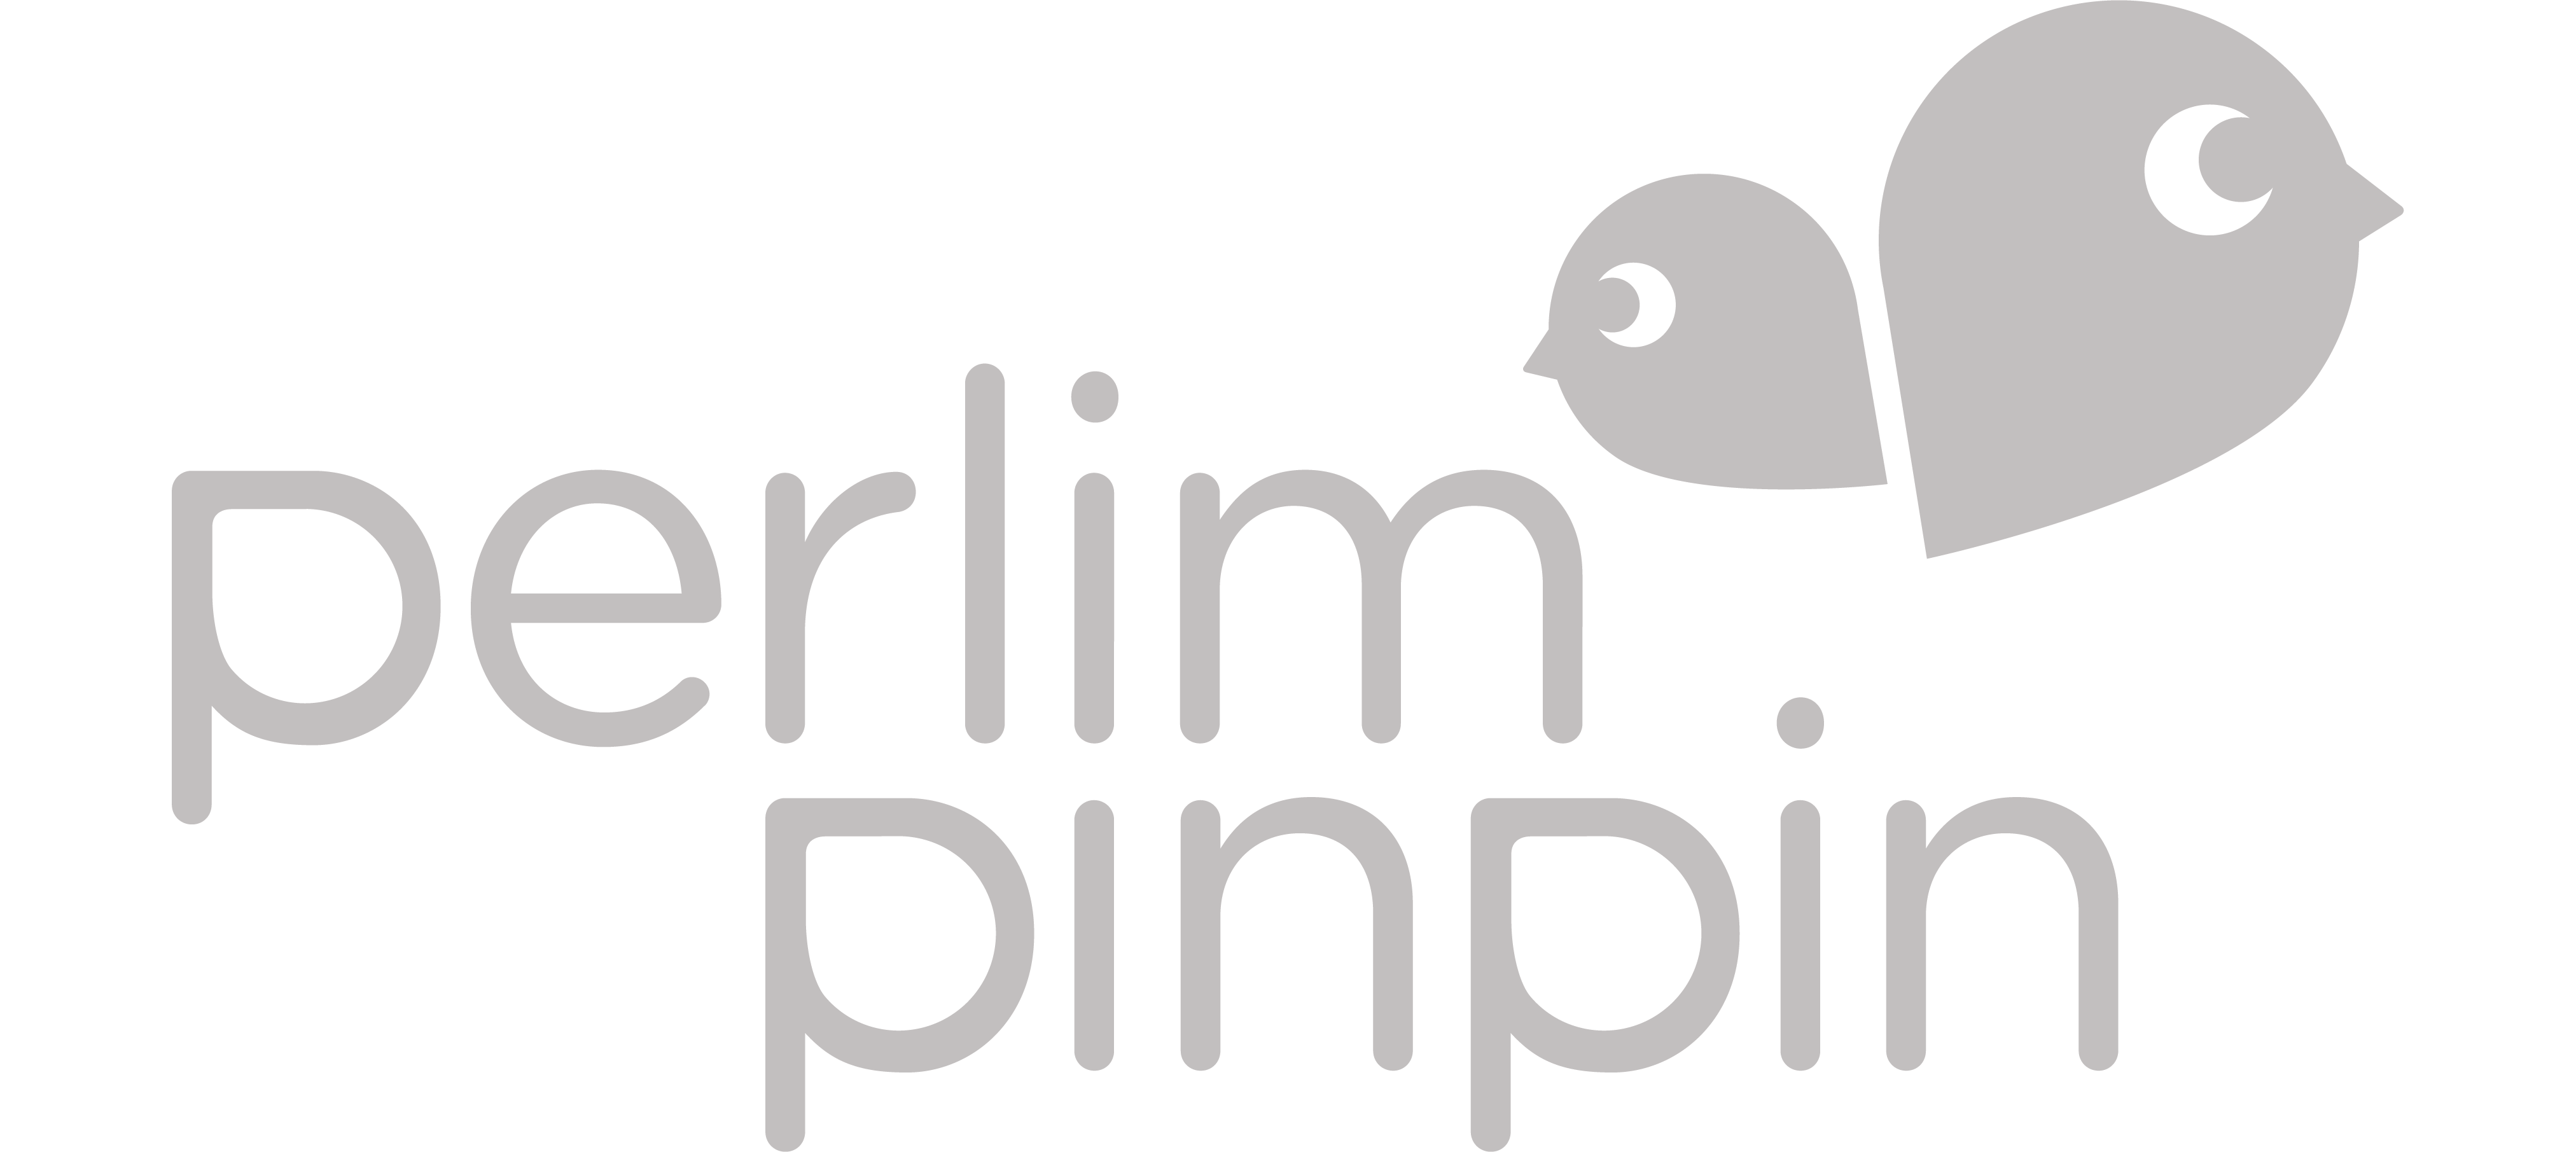 Perlimpipin